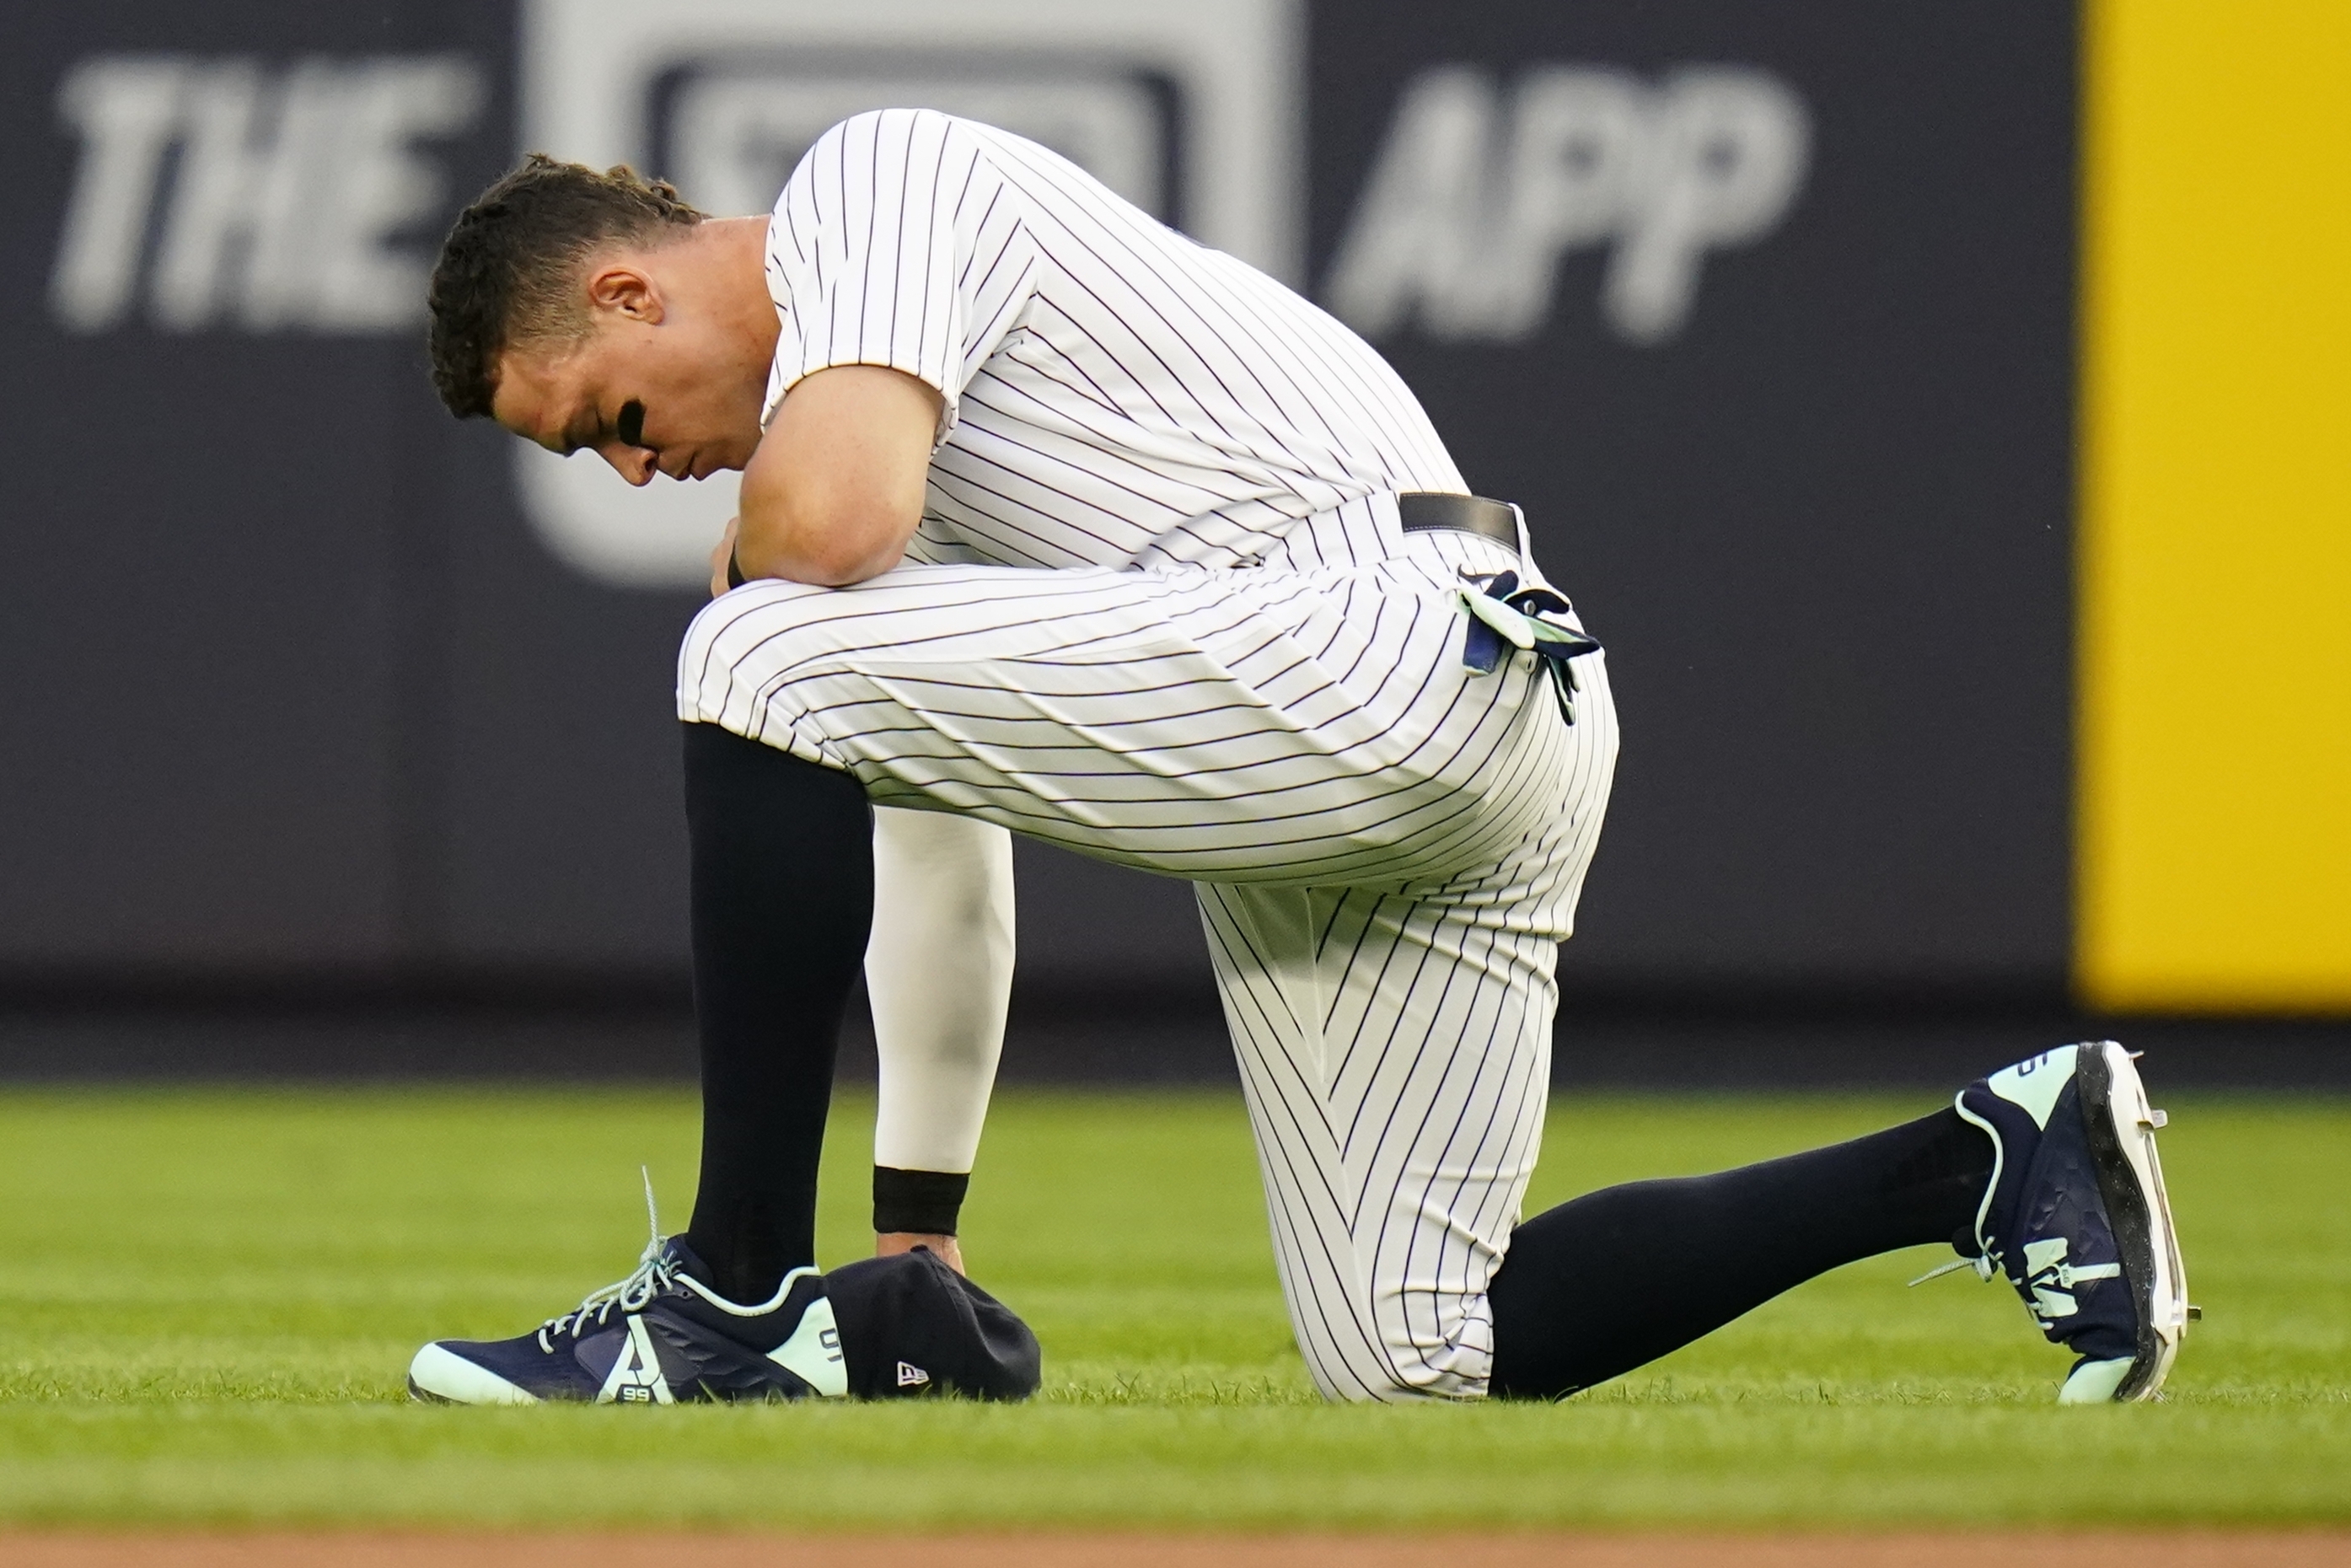 Yankees Aim For Back-to-Back Wins In Game 2 Against Rays